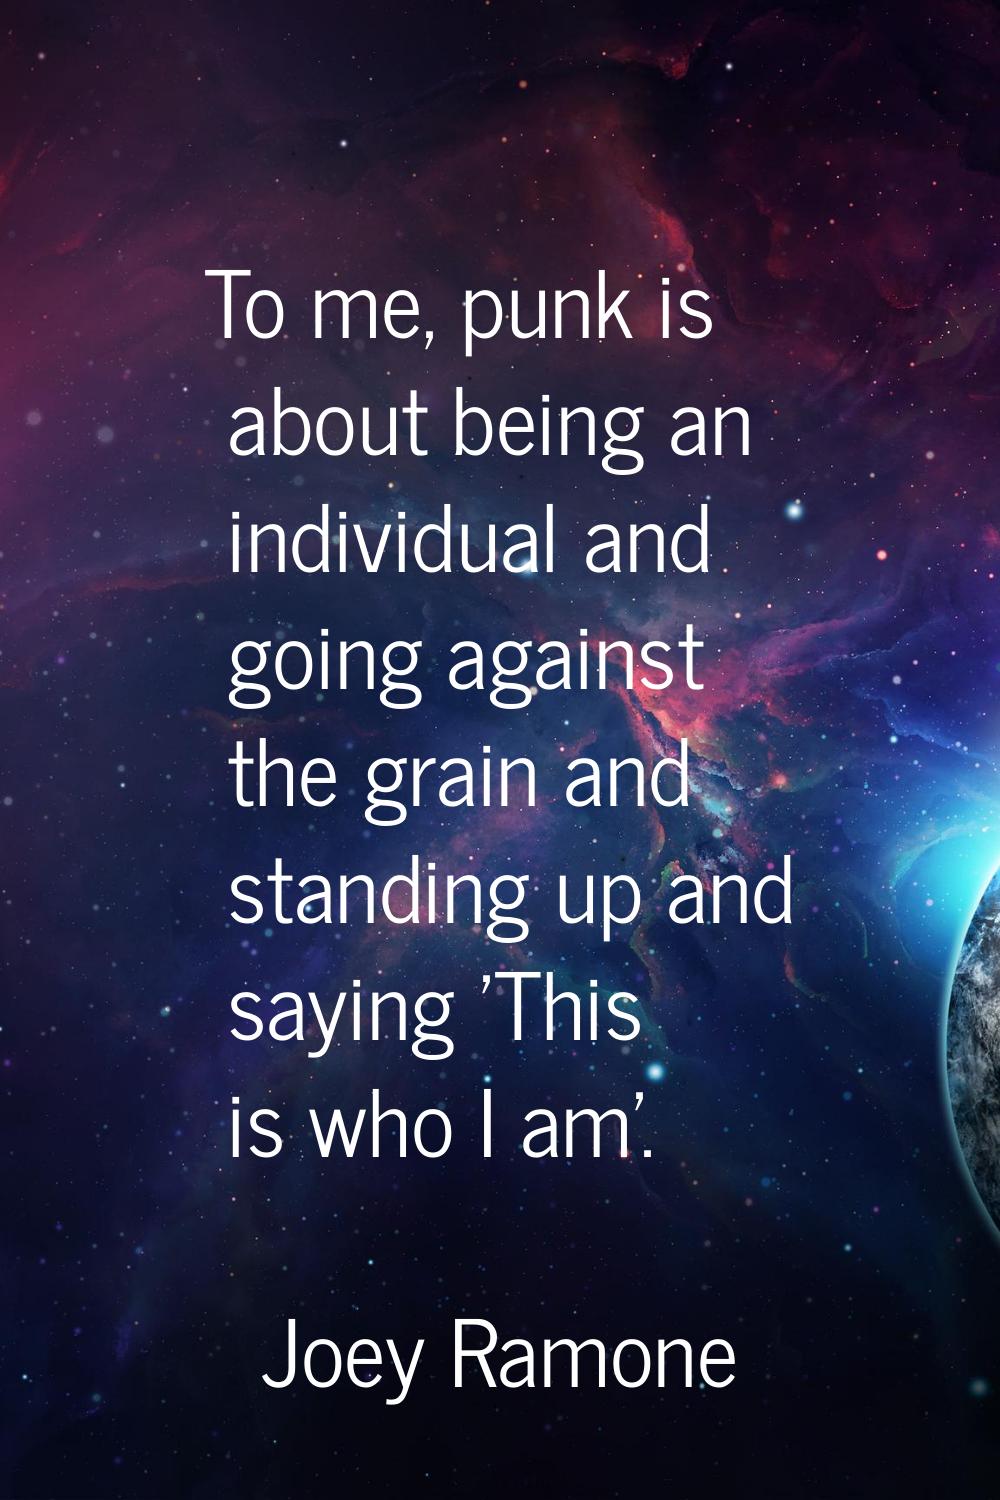 To me, punk is about being an individual and going against the grain and standing up and saying 'Th